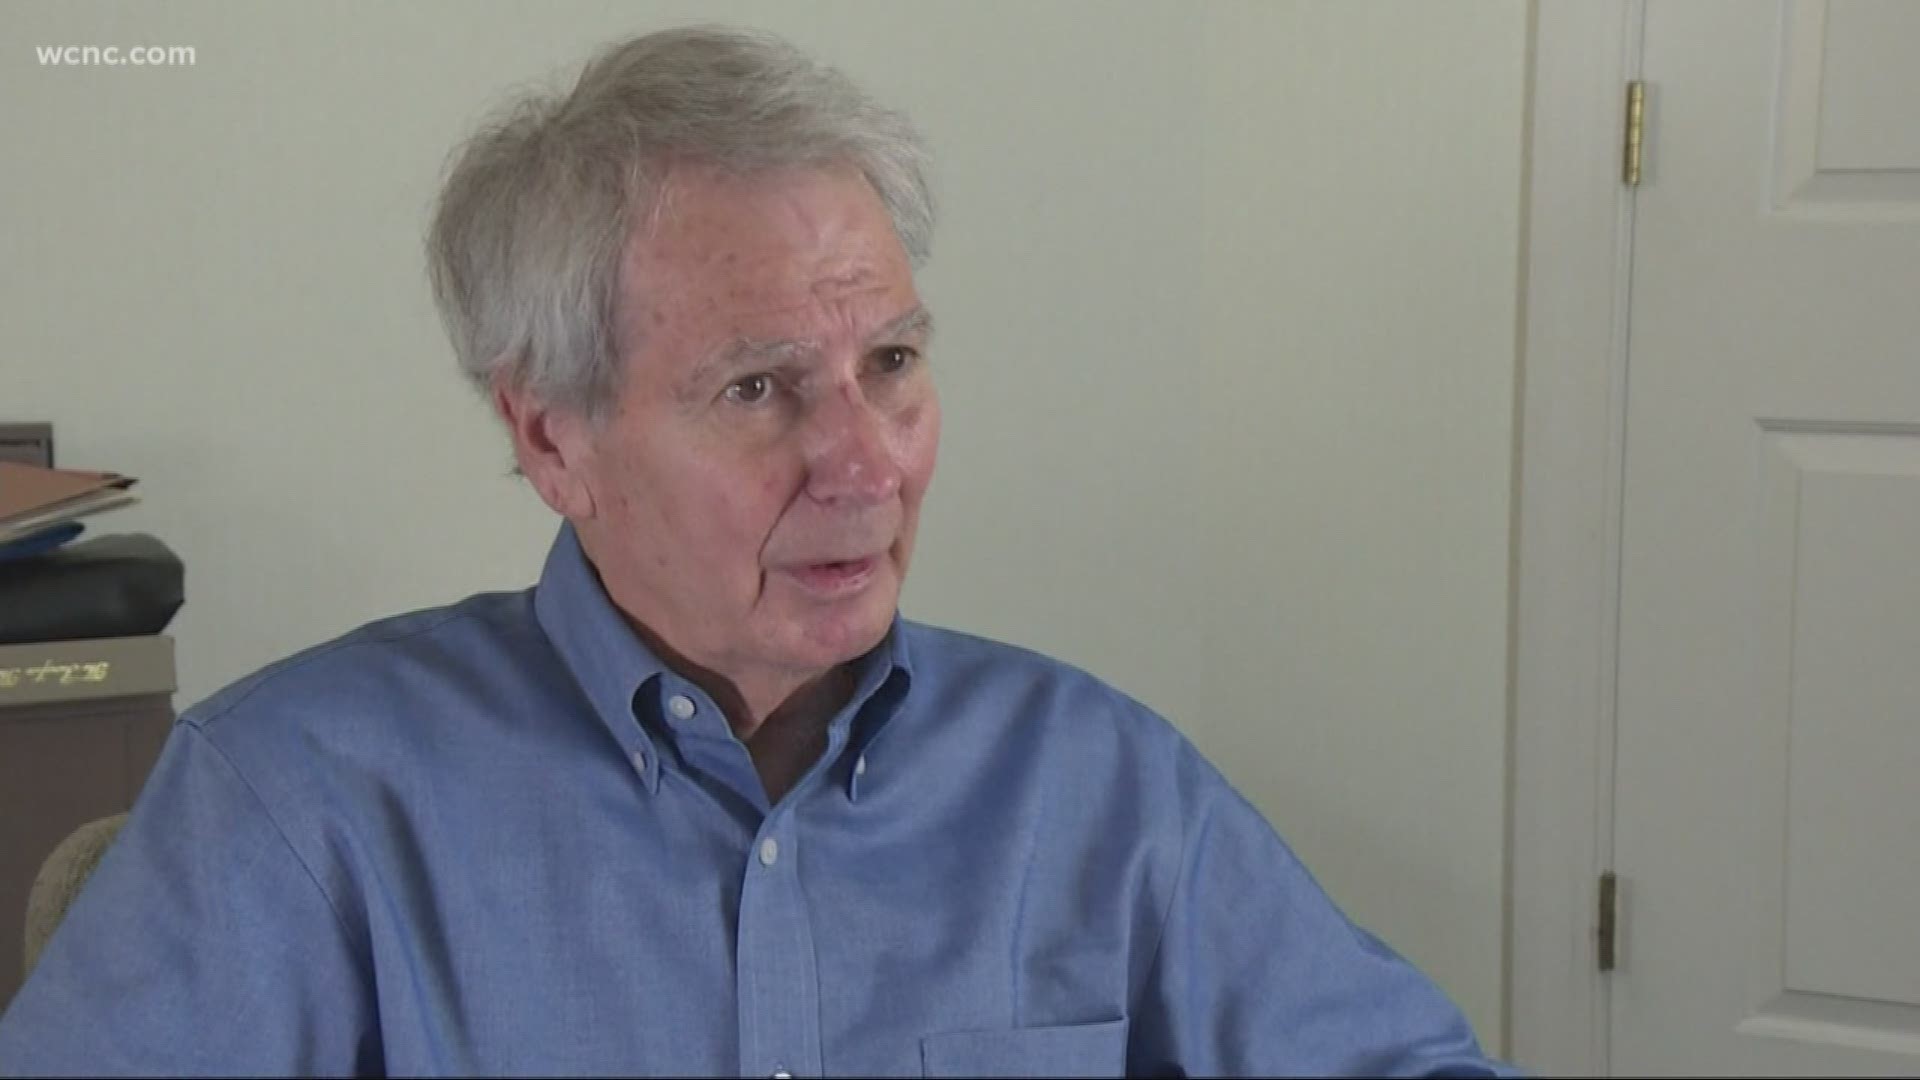 Congressman Walter Jones represents the third district. He has been battling an undisclosed illness since the fall. His leave of absence has kept him from casting votes in the U.S. House since September.